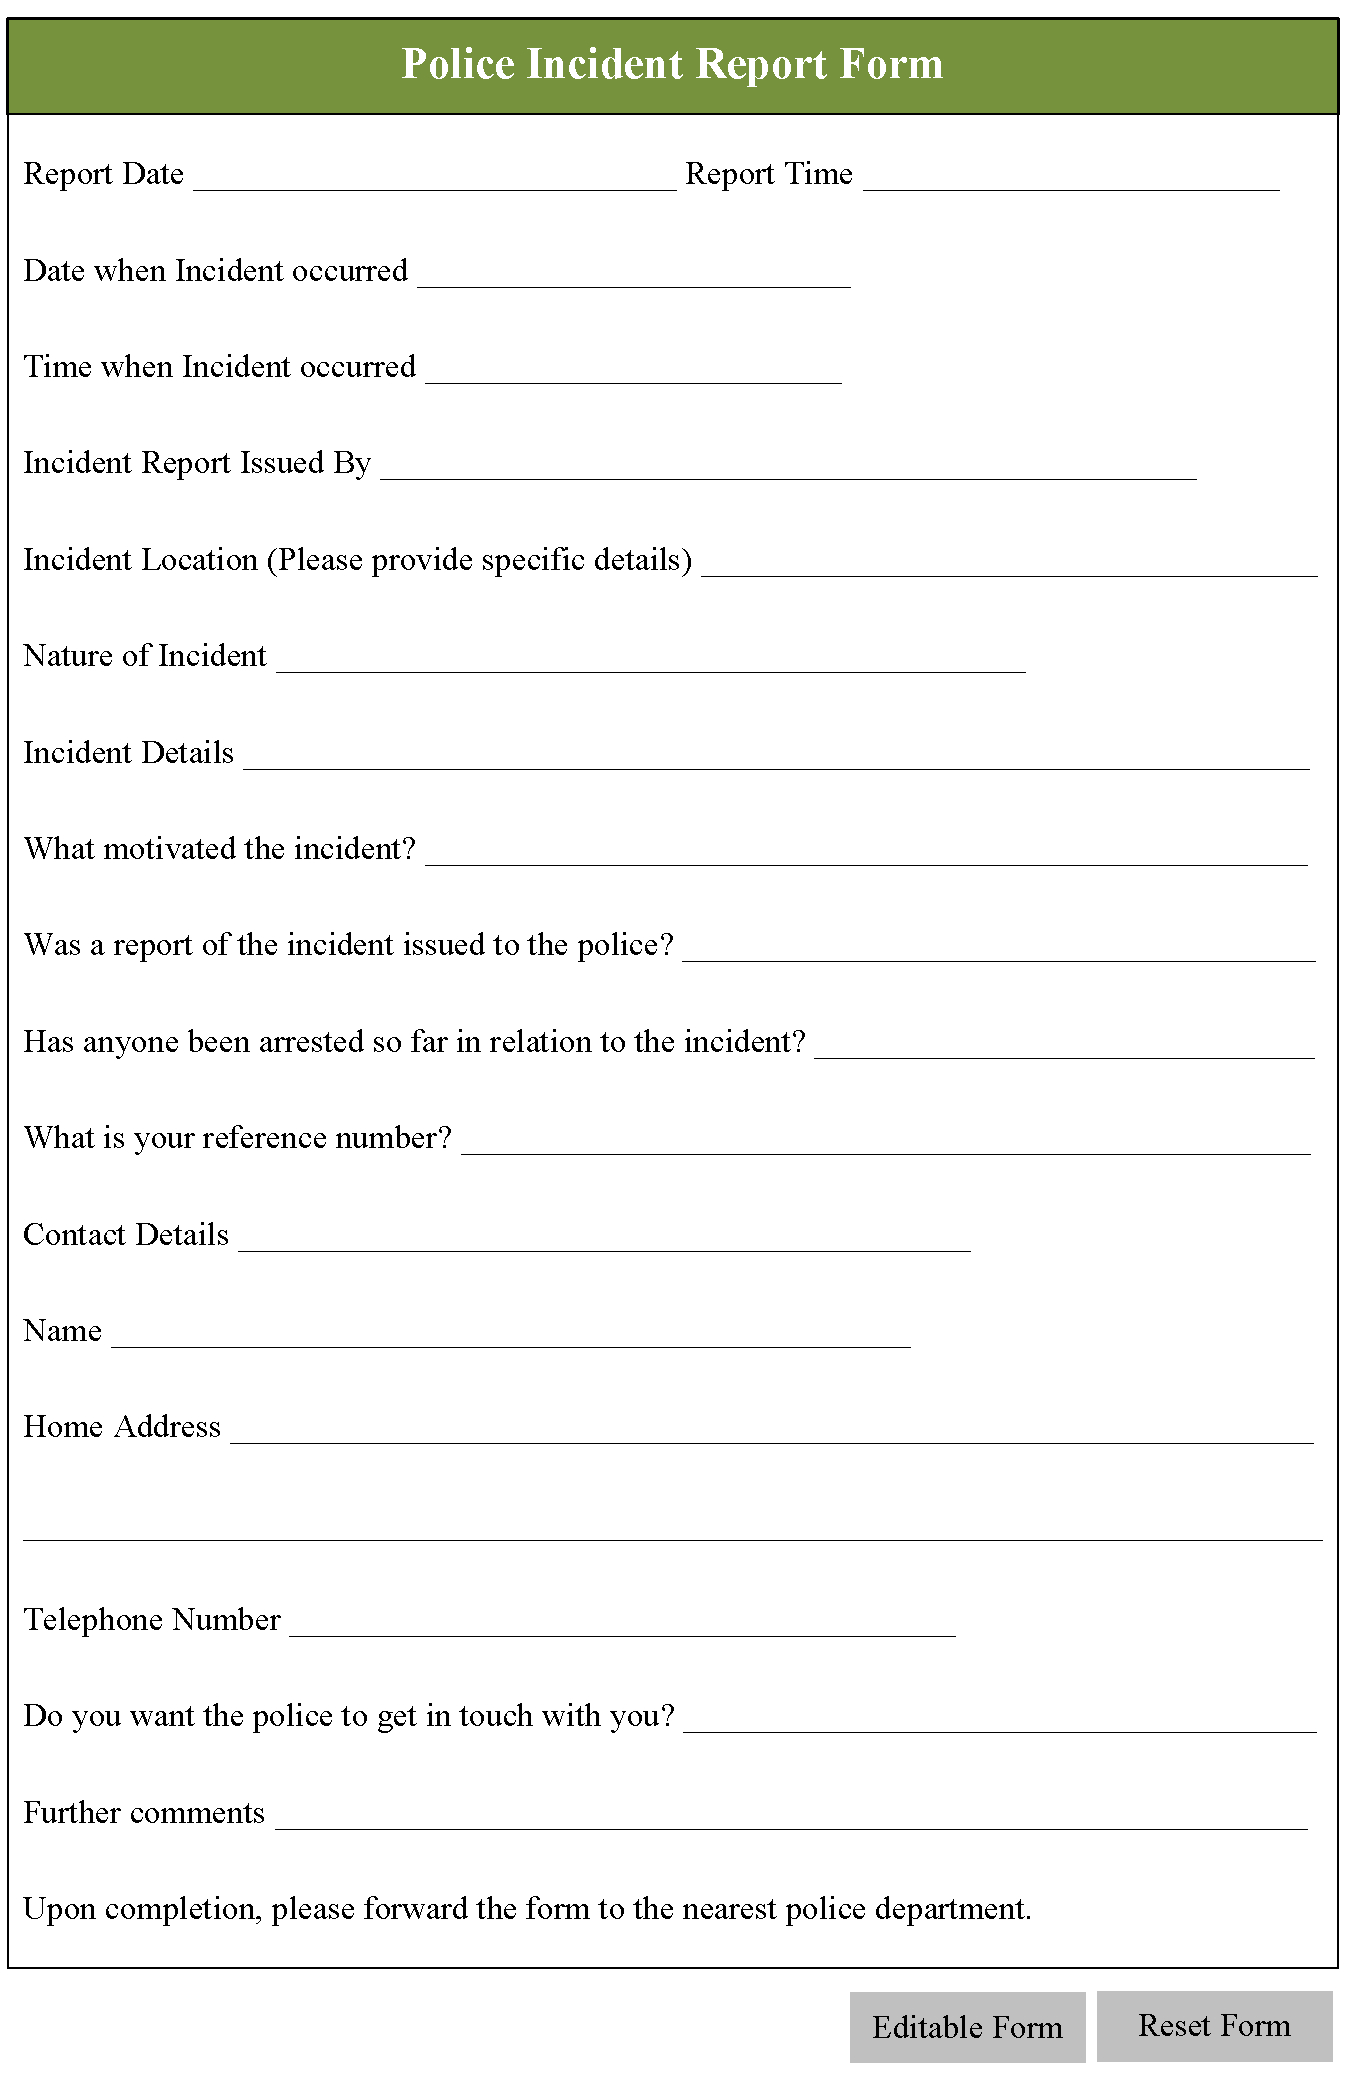 Incident Report Template Nz ] – Incident Accident Report Throughout Police Incident Report Template